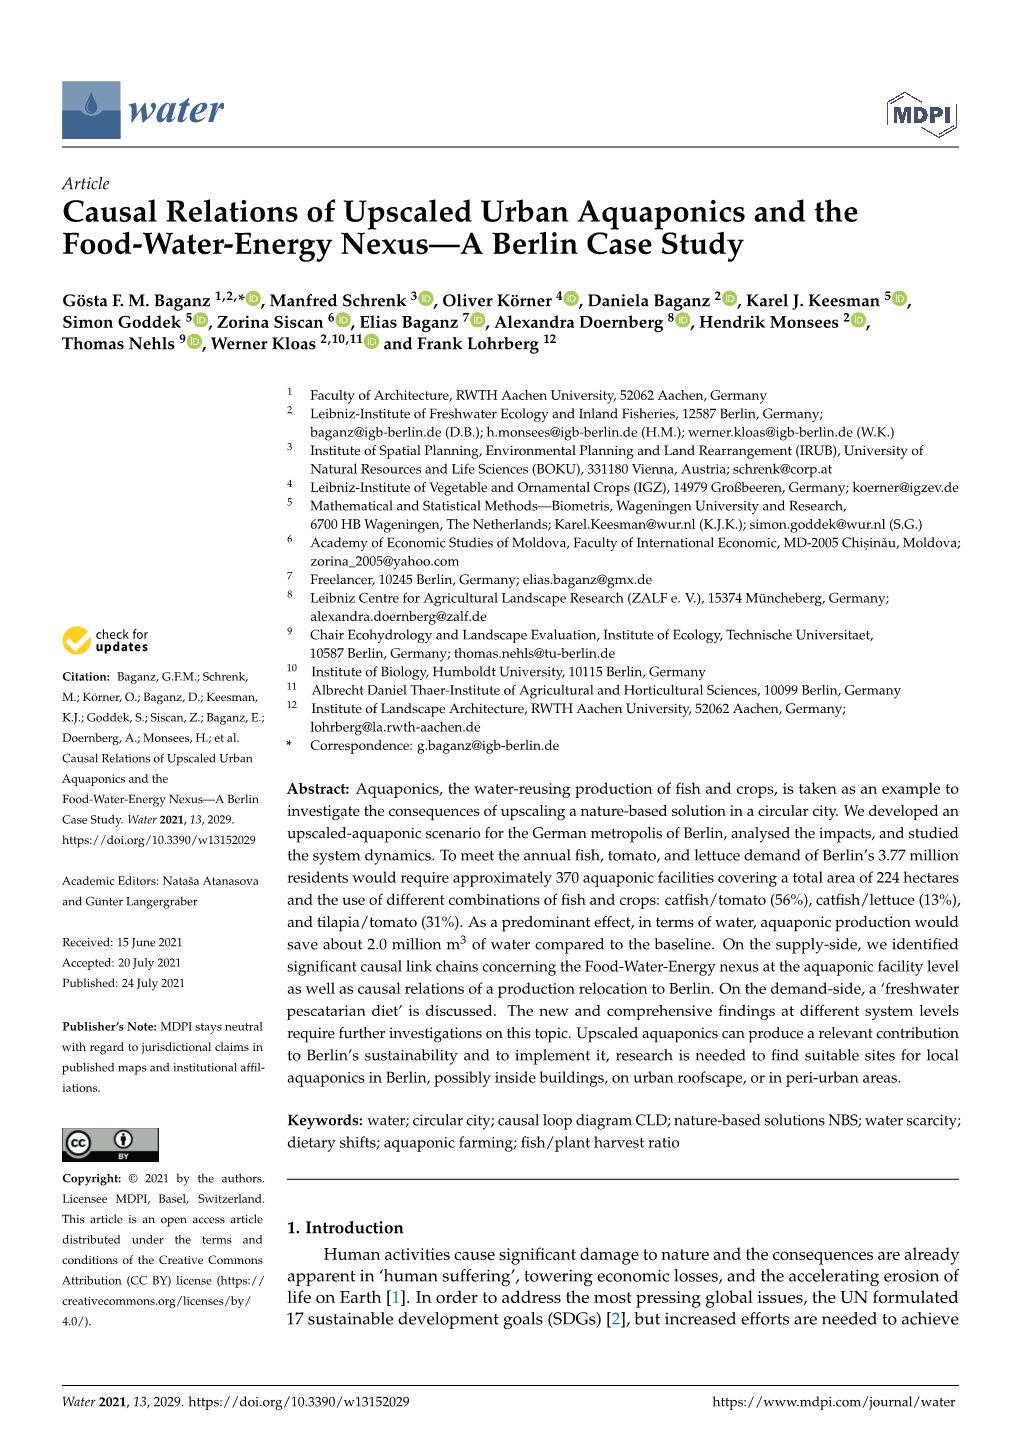 Causal Relations of Upscaled Urban Aquaponics and the Food-Water-Energy Nexus—A Berlin Case Study